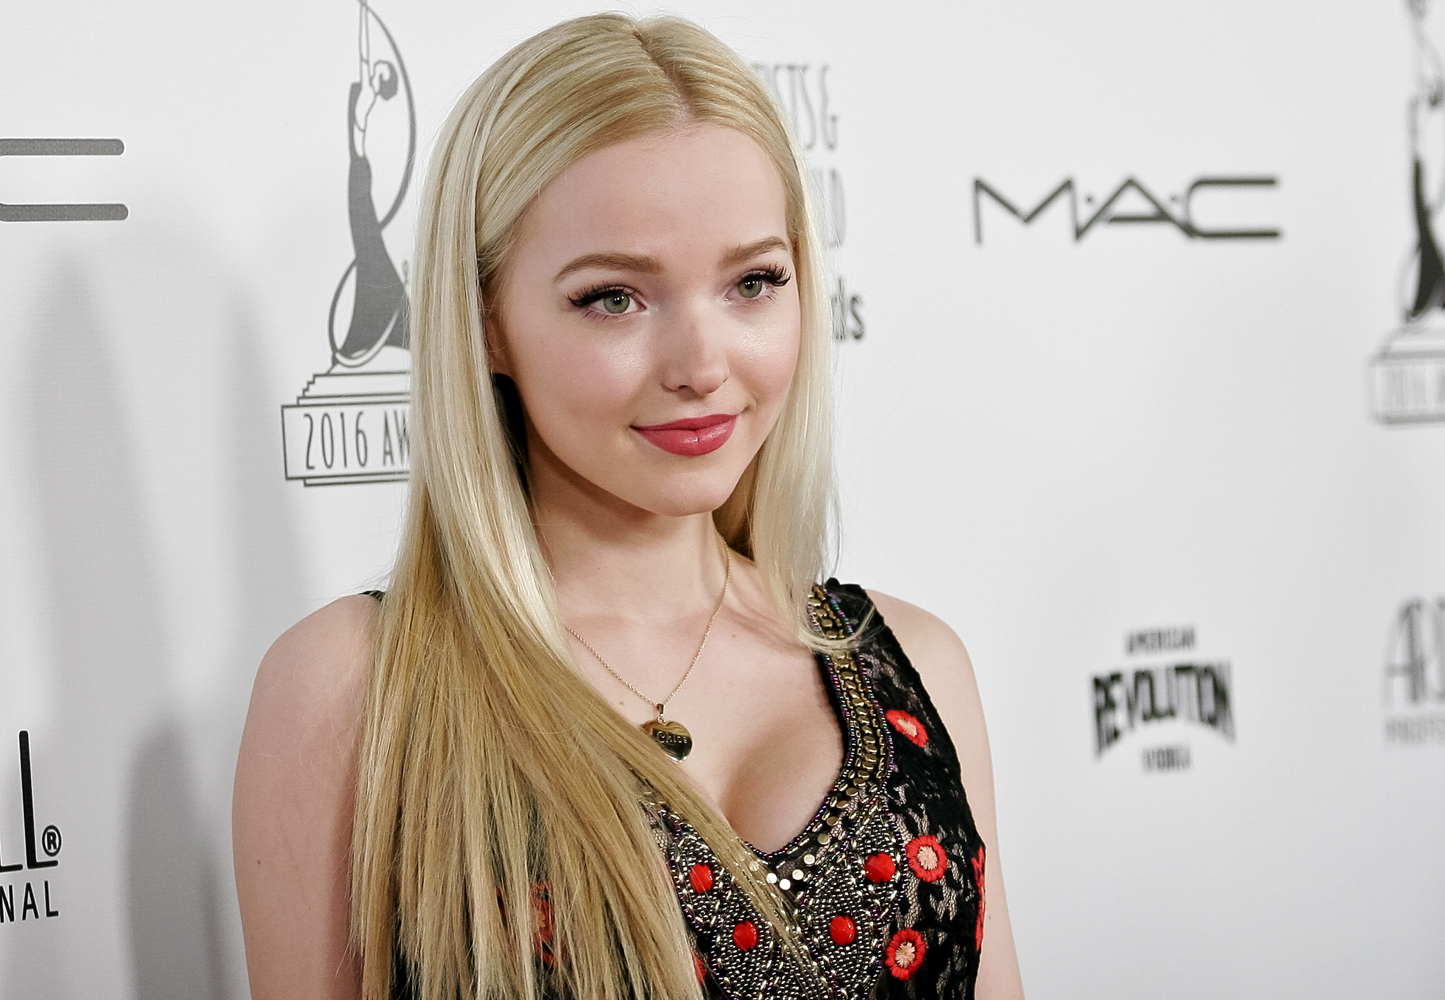 HOLLYWOOD, CA - FEBRUARY 20: Dove Cameron attends the Make-Up Artists and Hair Stylists Guild Awards at Paramount Studios on February 20, 2016 in Hollywood, California. (Photo by Tibrina Hobson/Getty Images)